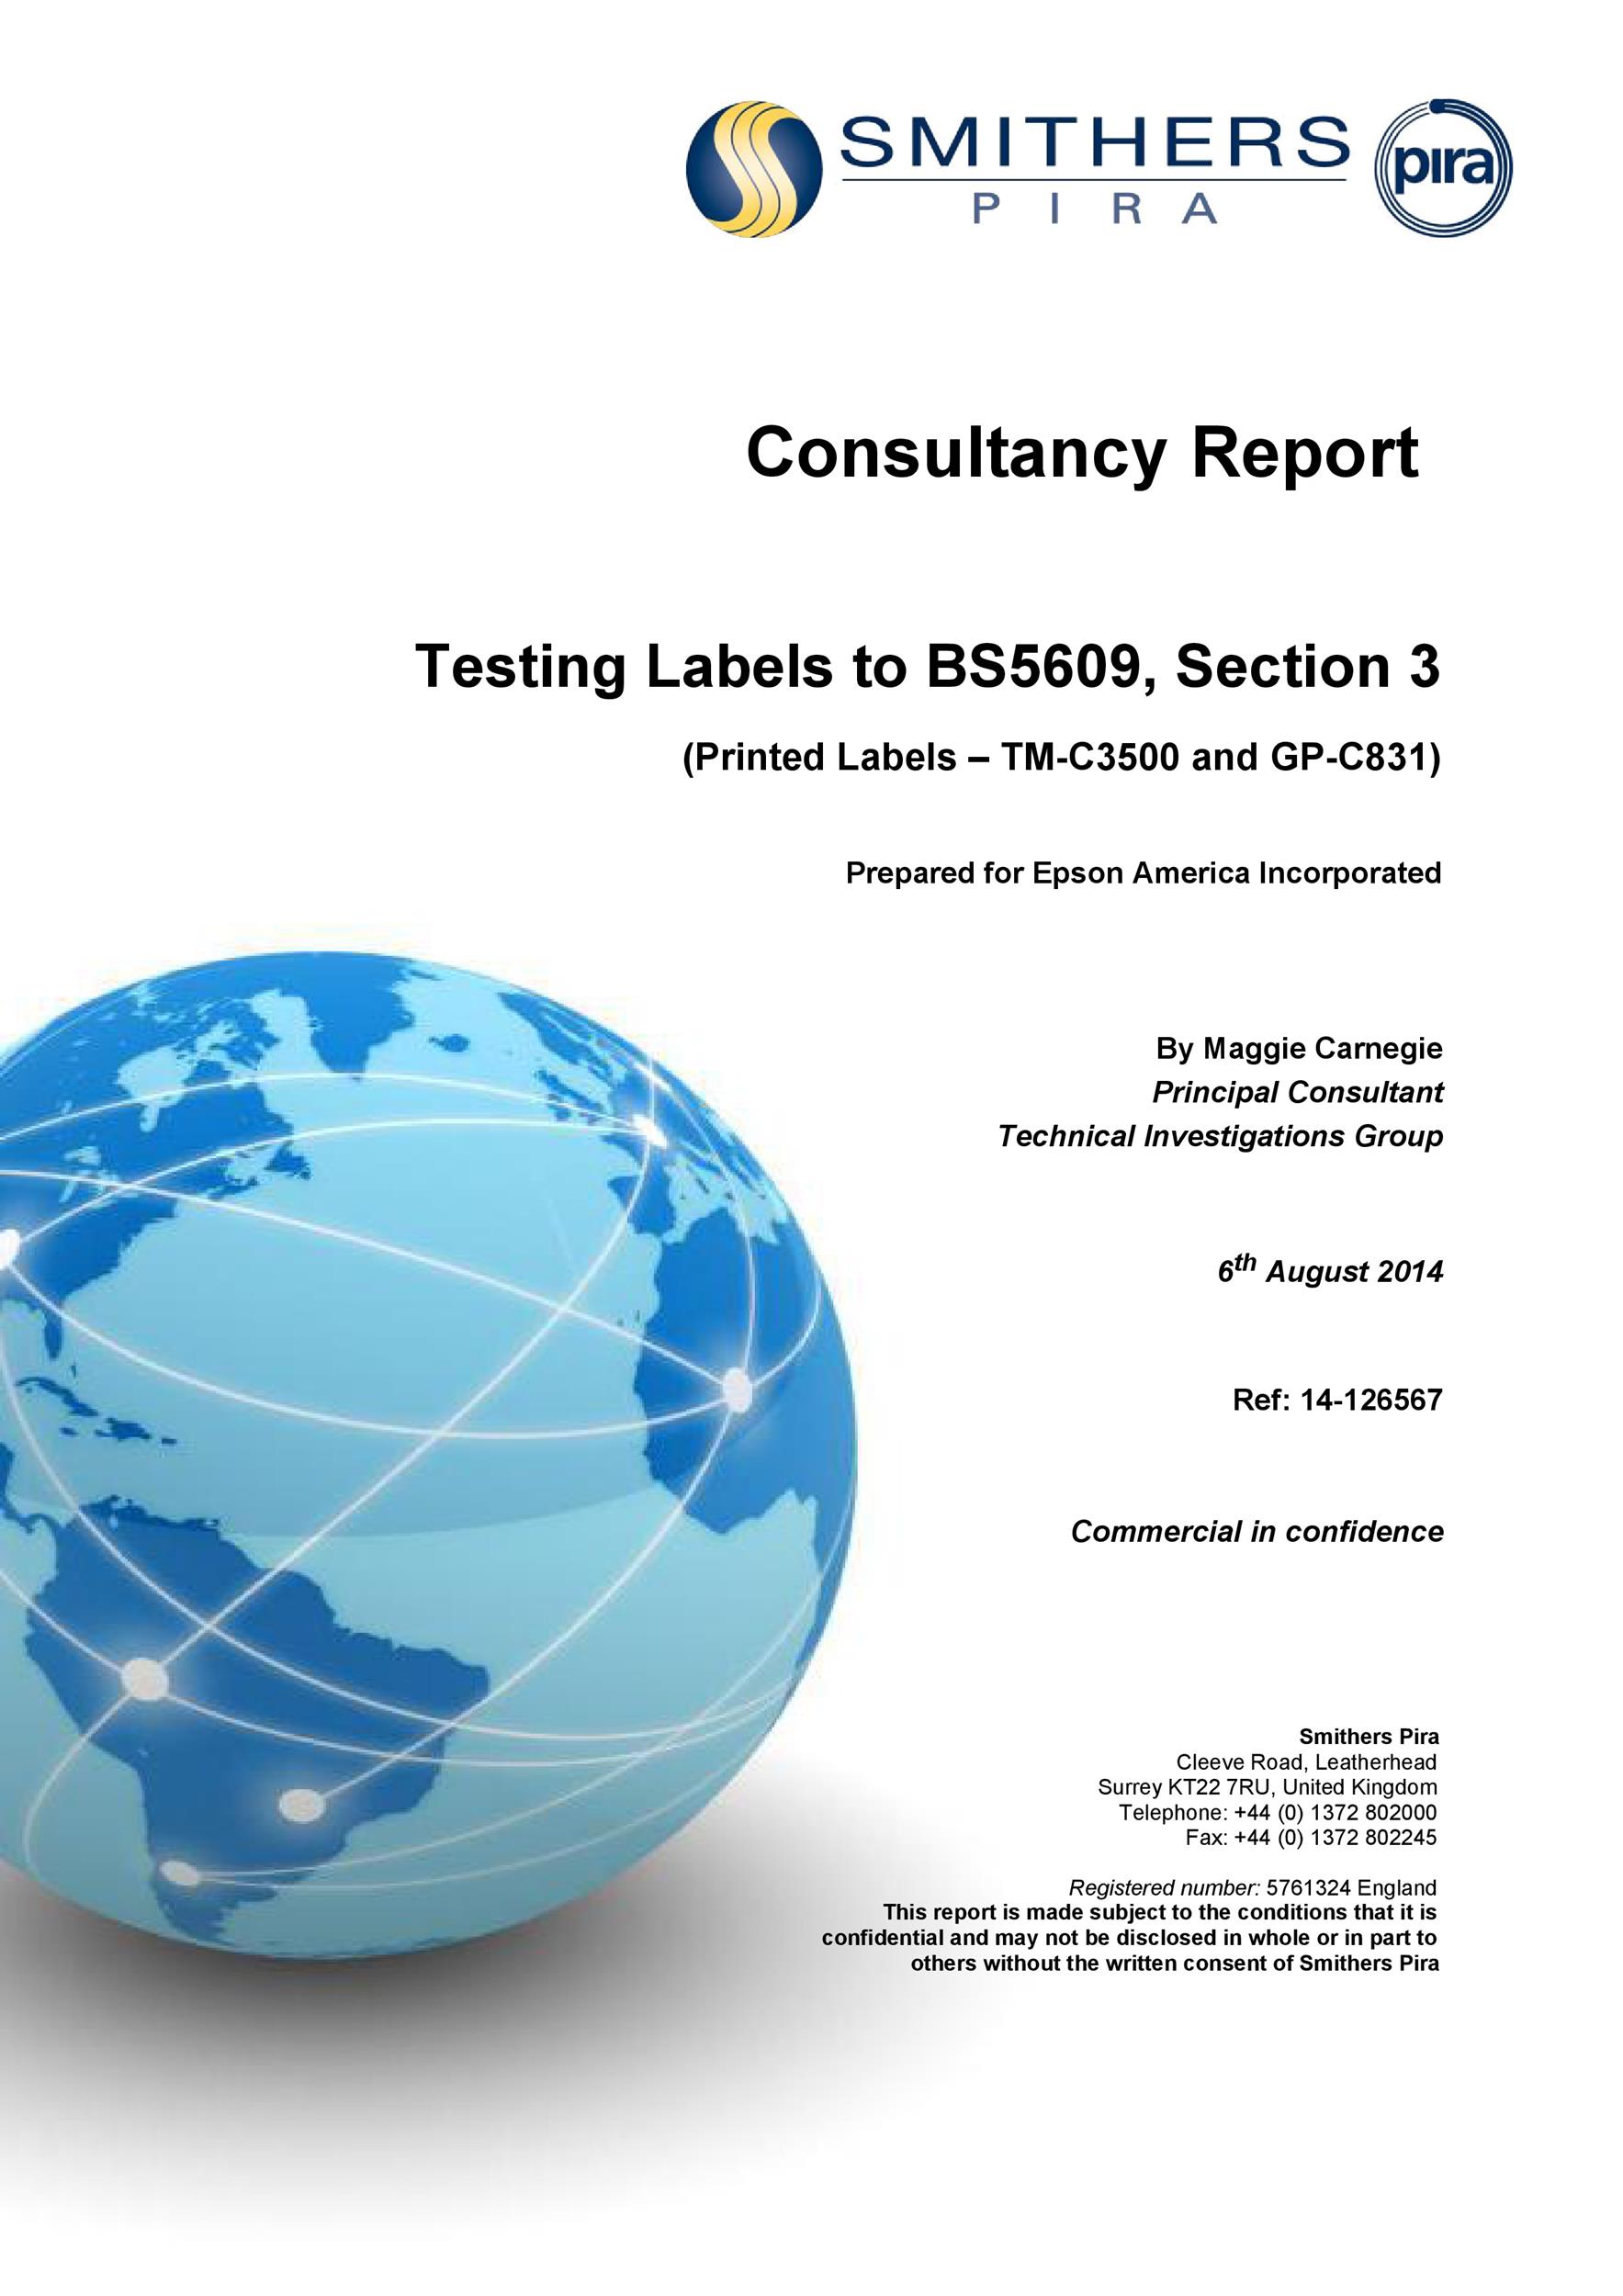 Free consulting report template 09